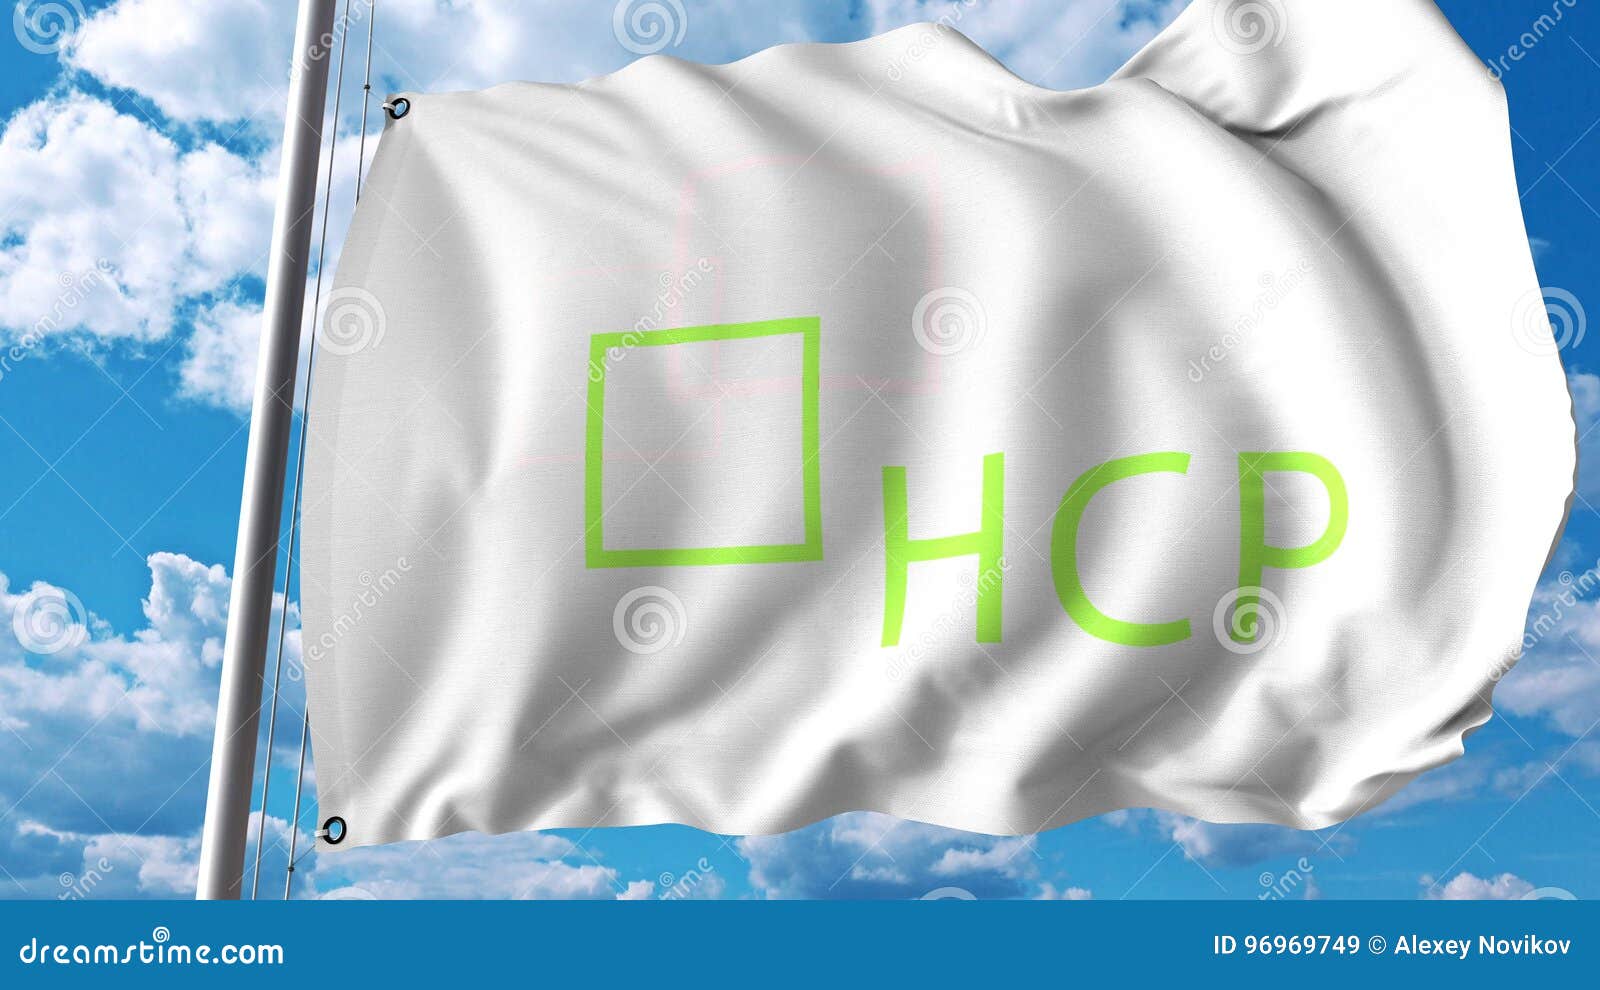 Waving Flag With Hcp Inc Logo Editoial 3d Rendering Editorial